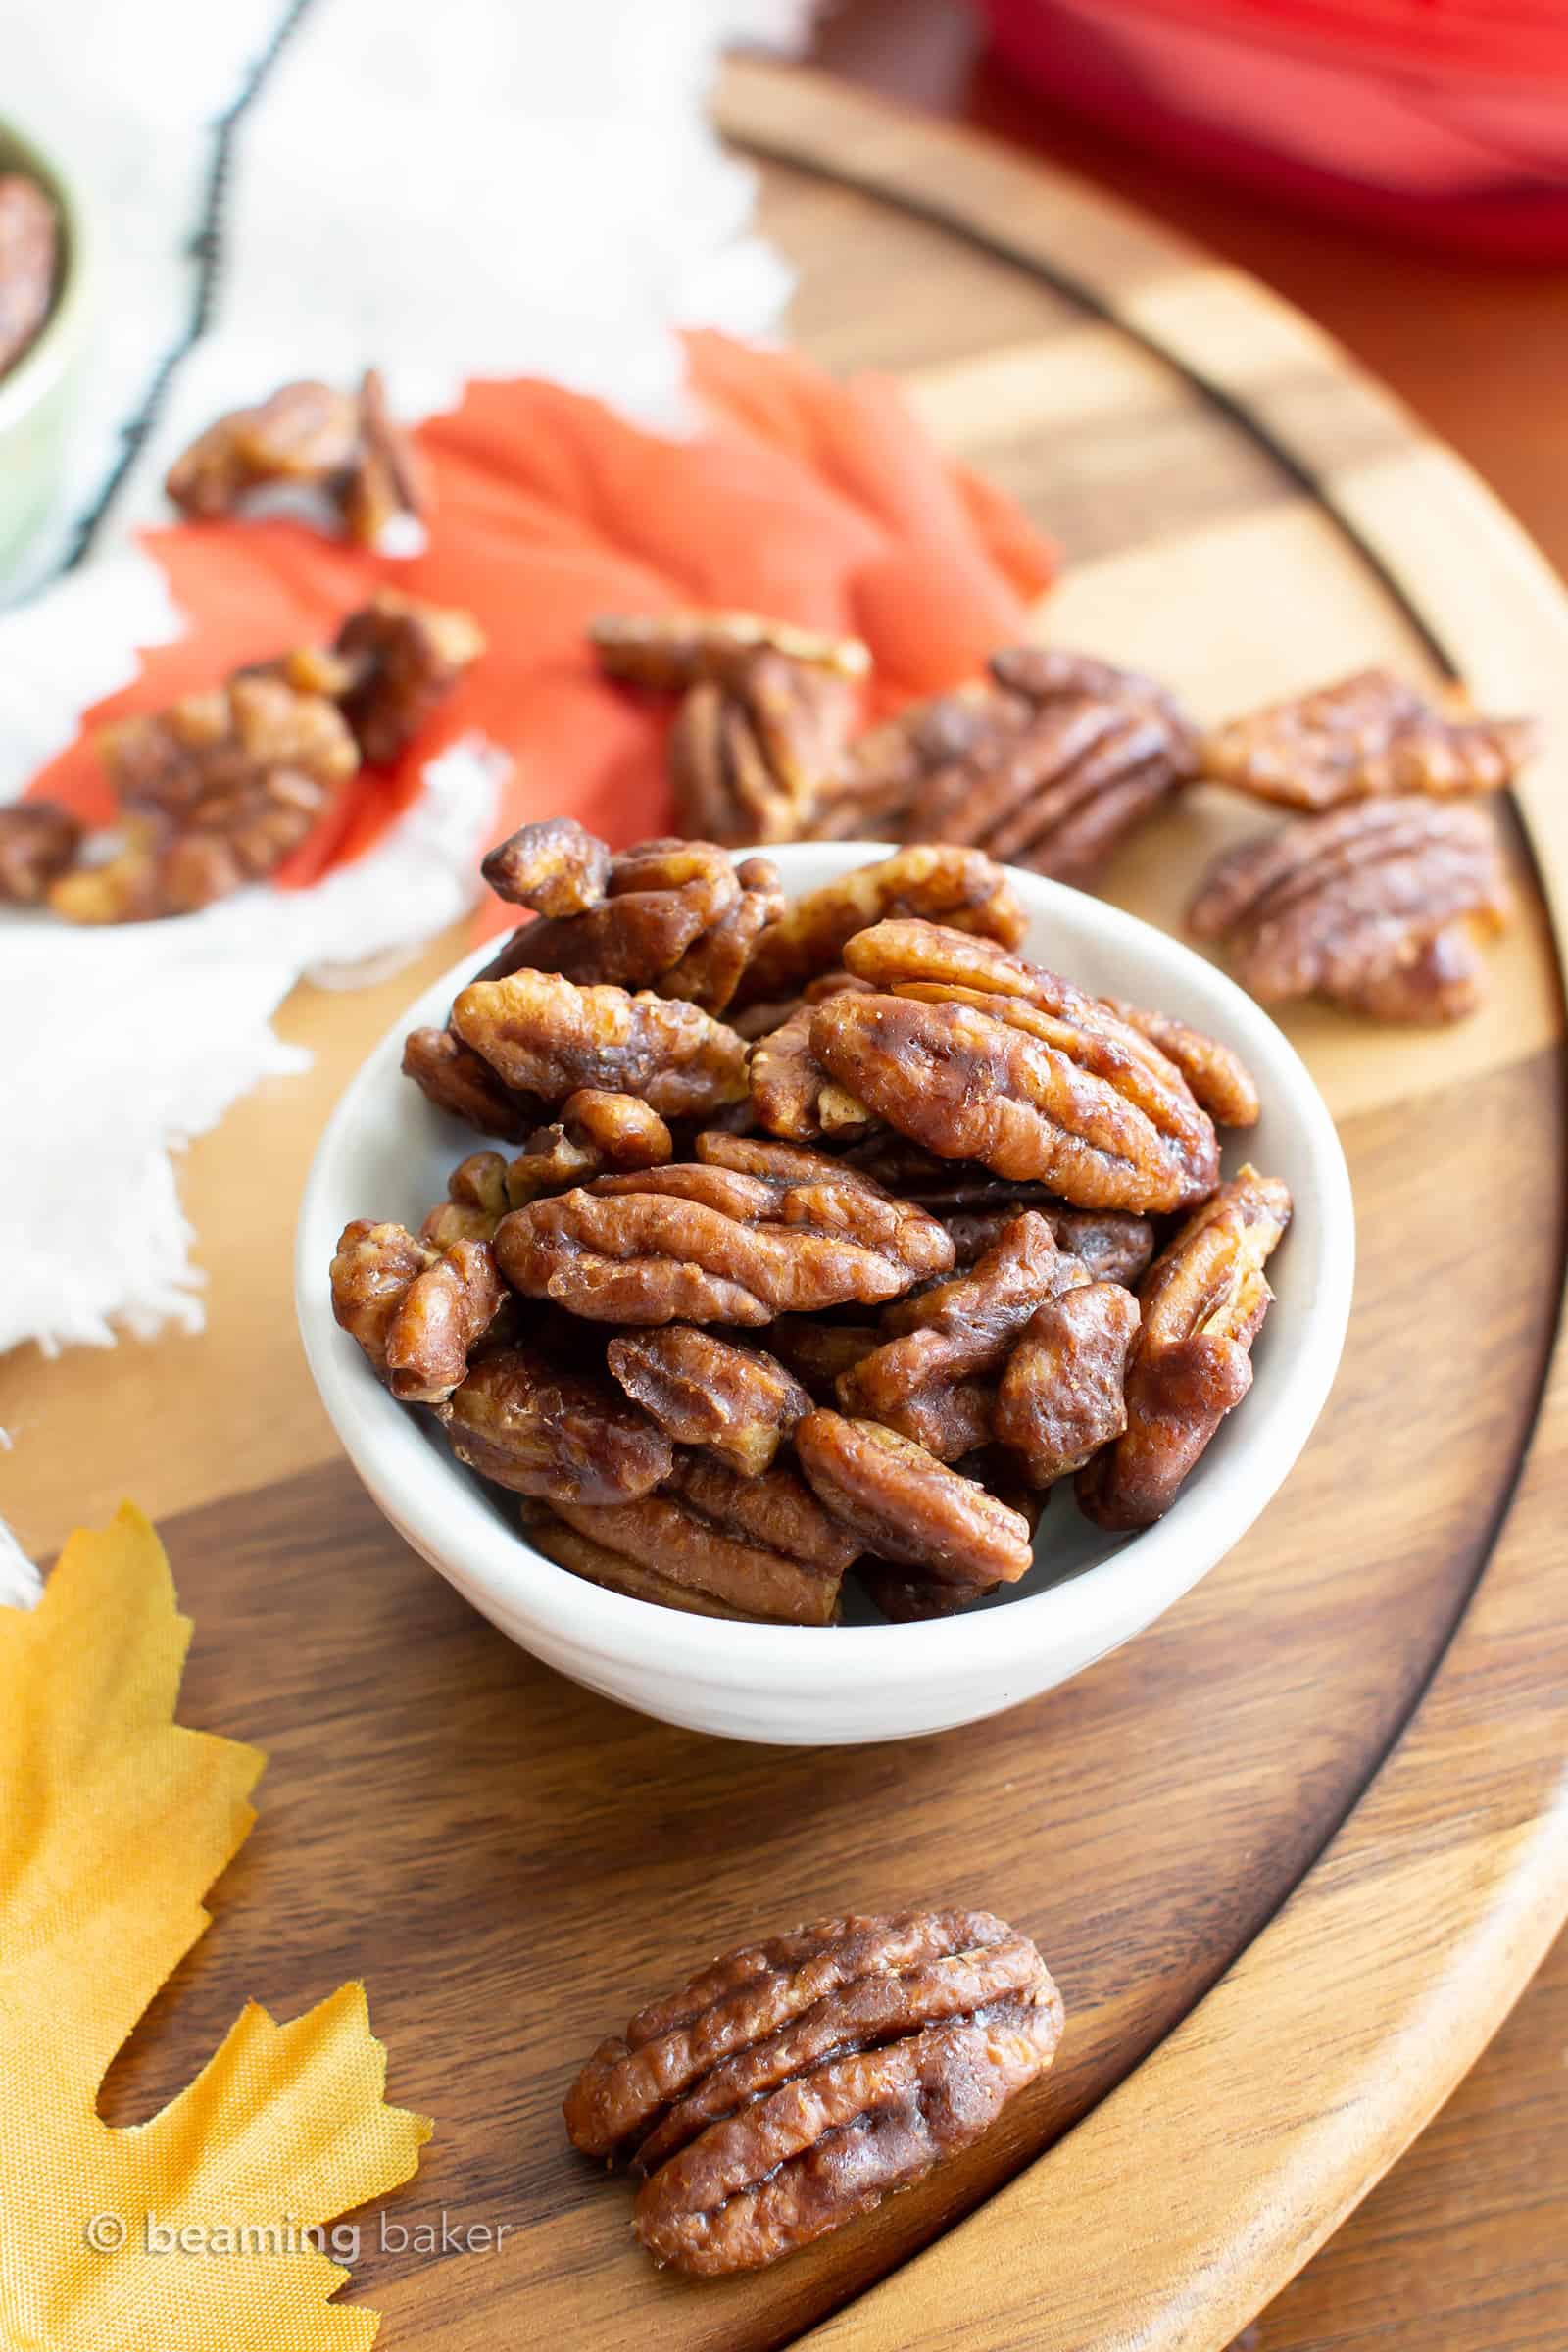 Skillet Roasted Maple Cinnamon Pecans: this 5 minute maple pecans recipe is quick & easy! The ultimate maple roasted pecans with cinnamon & coconut sugar! #Paleo #Snacks #Pecans #Maple | Recipe at BeamingBaker.com